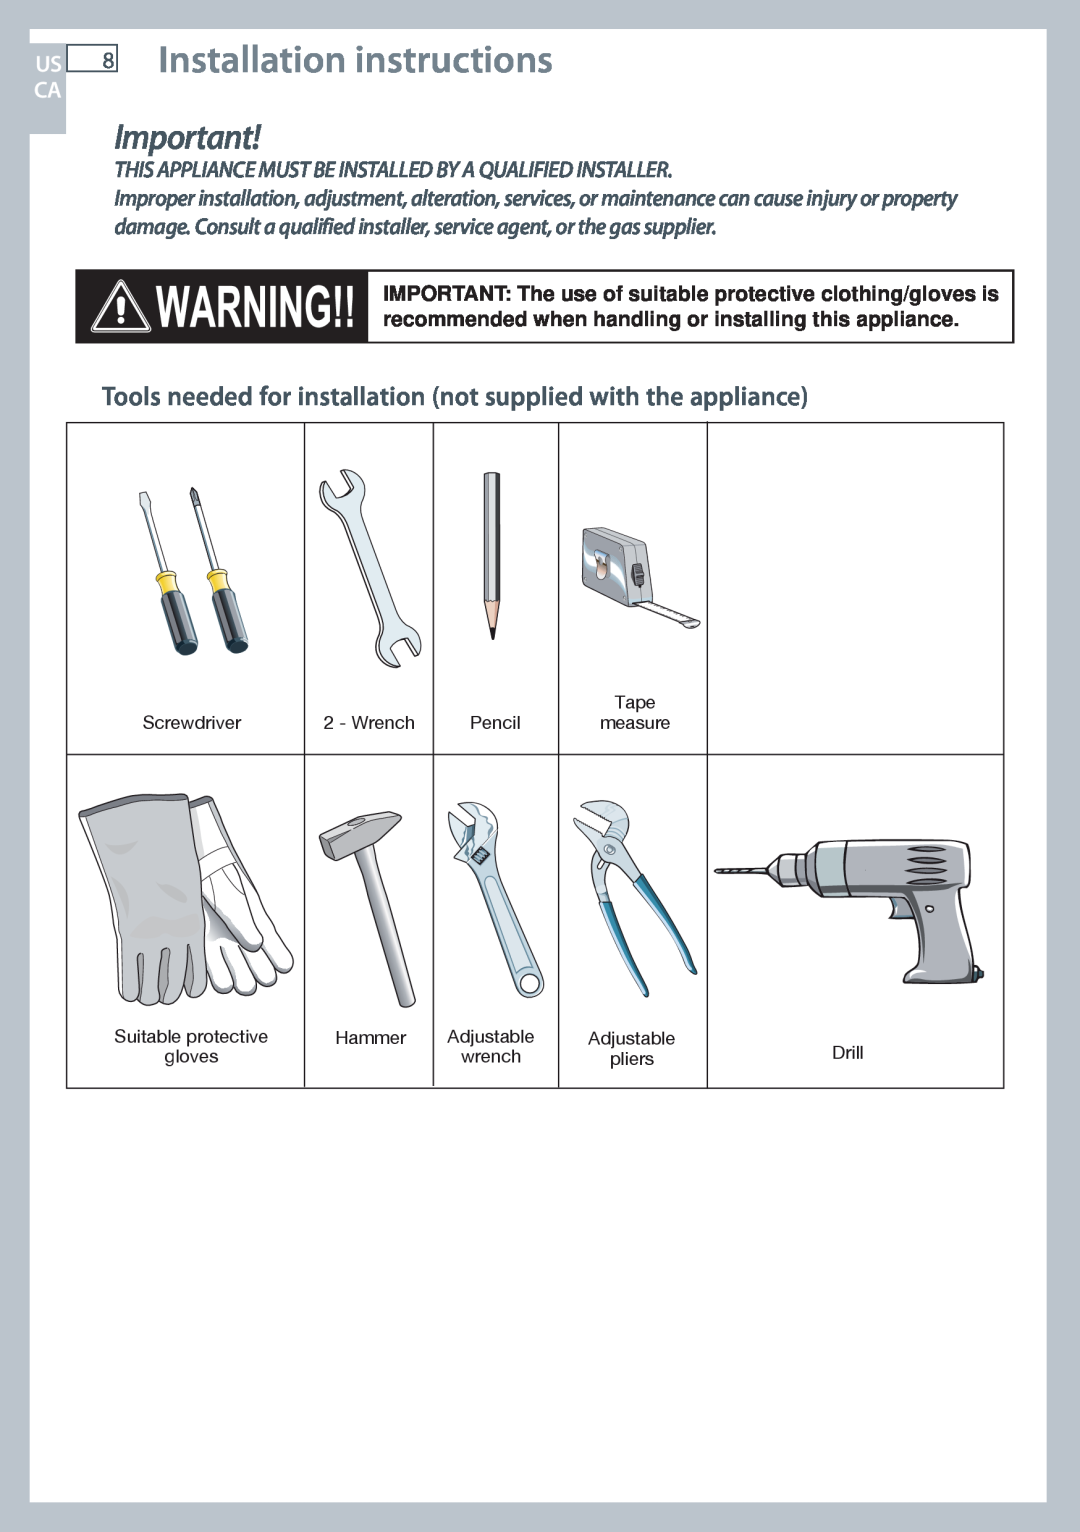 Fisher & Paykel OR305SDPWSX Installation instructions, Tools needed for installation not supplied with the appliance 